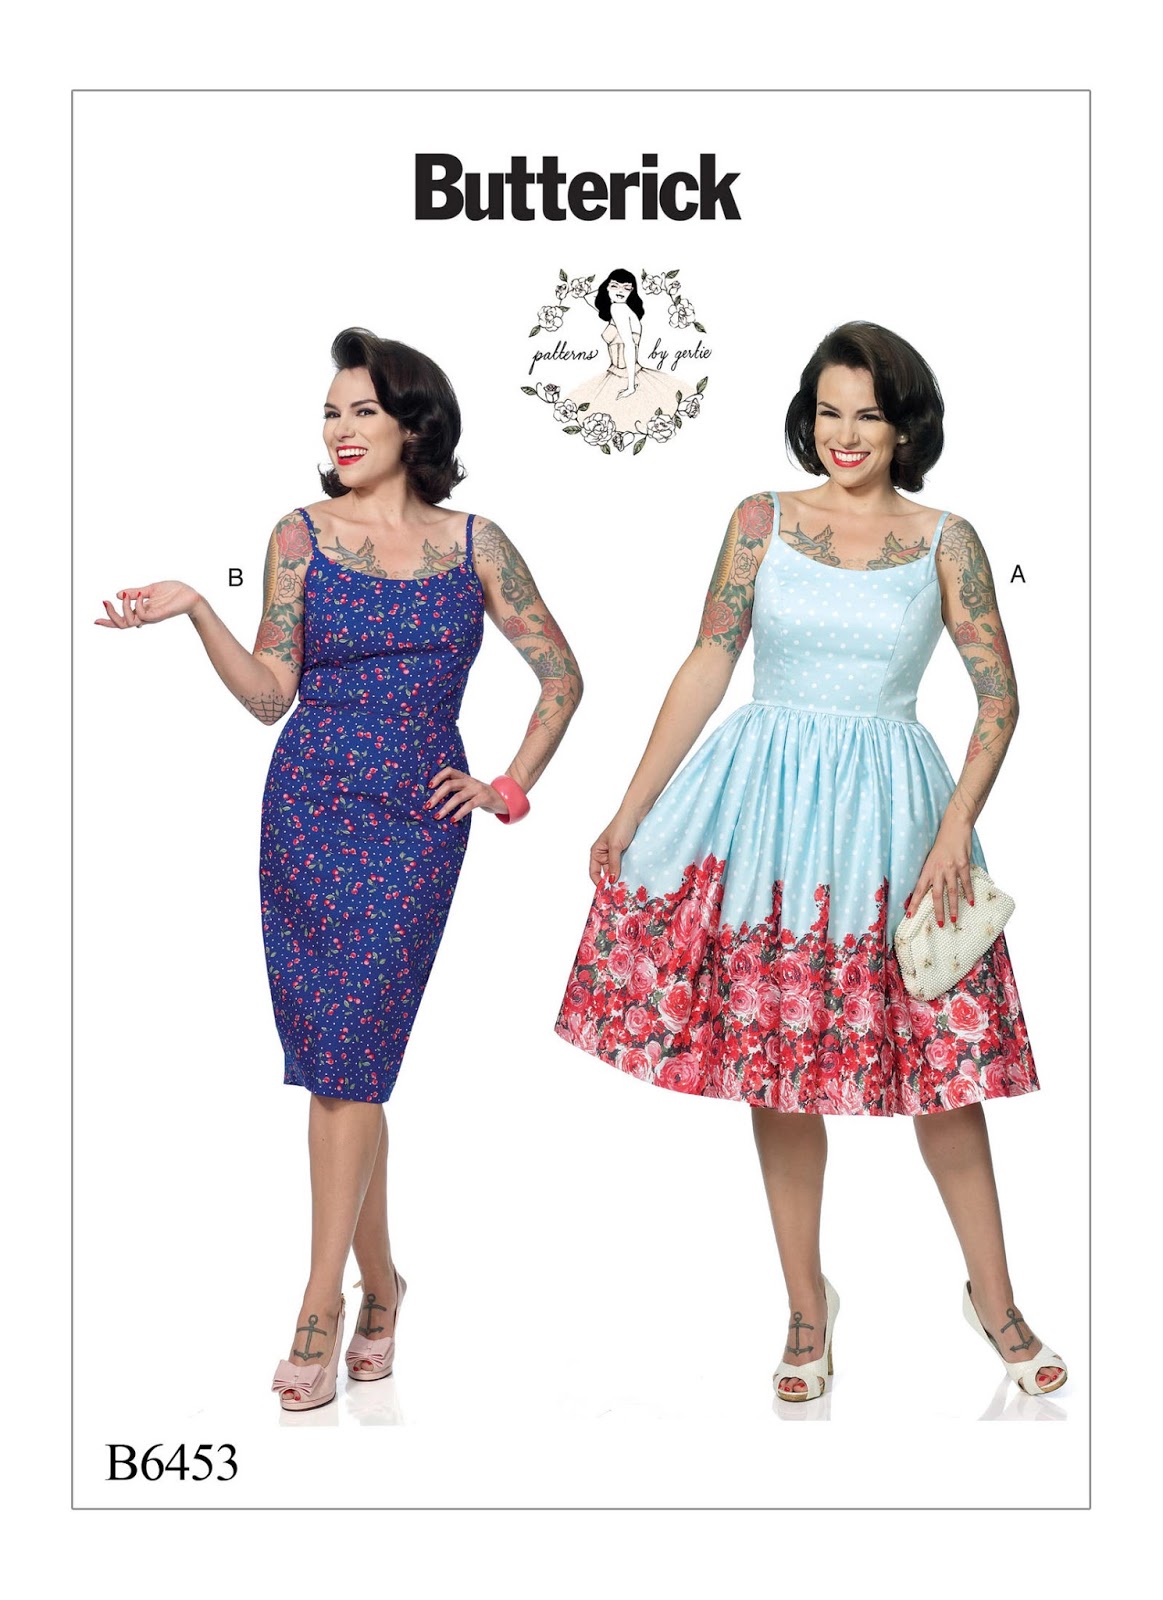 Gertie's New Blog for Better Sewing: Announcing the B6453 Sundress Sew -Along!